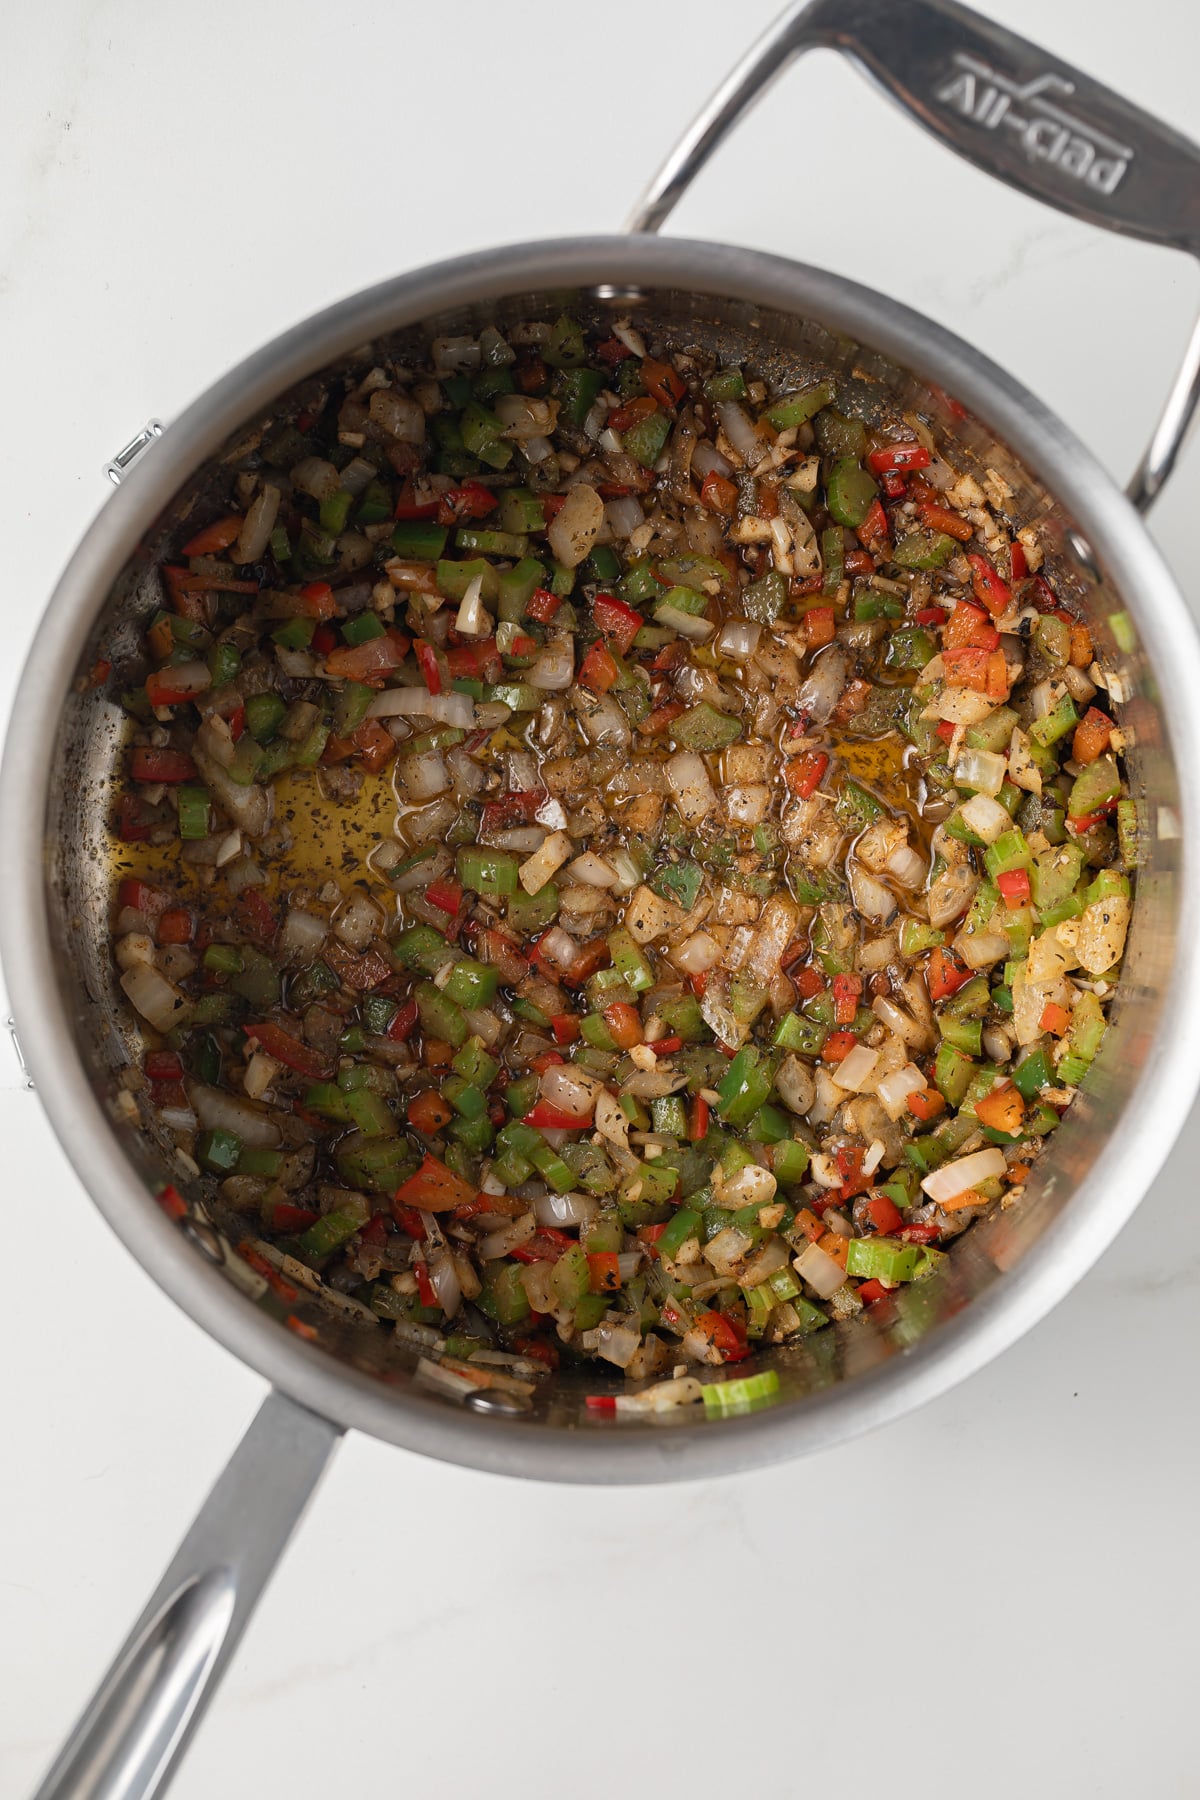 Sauteed veggies with spices in saucepan.